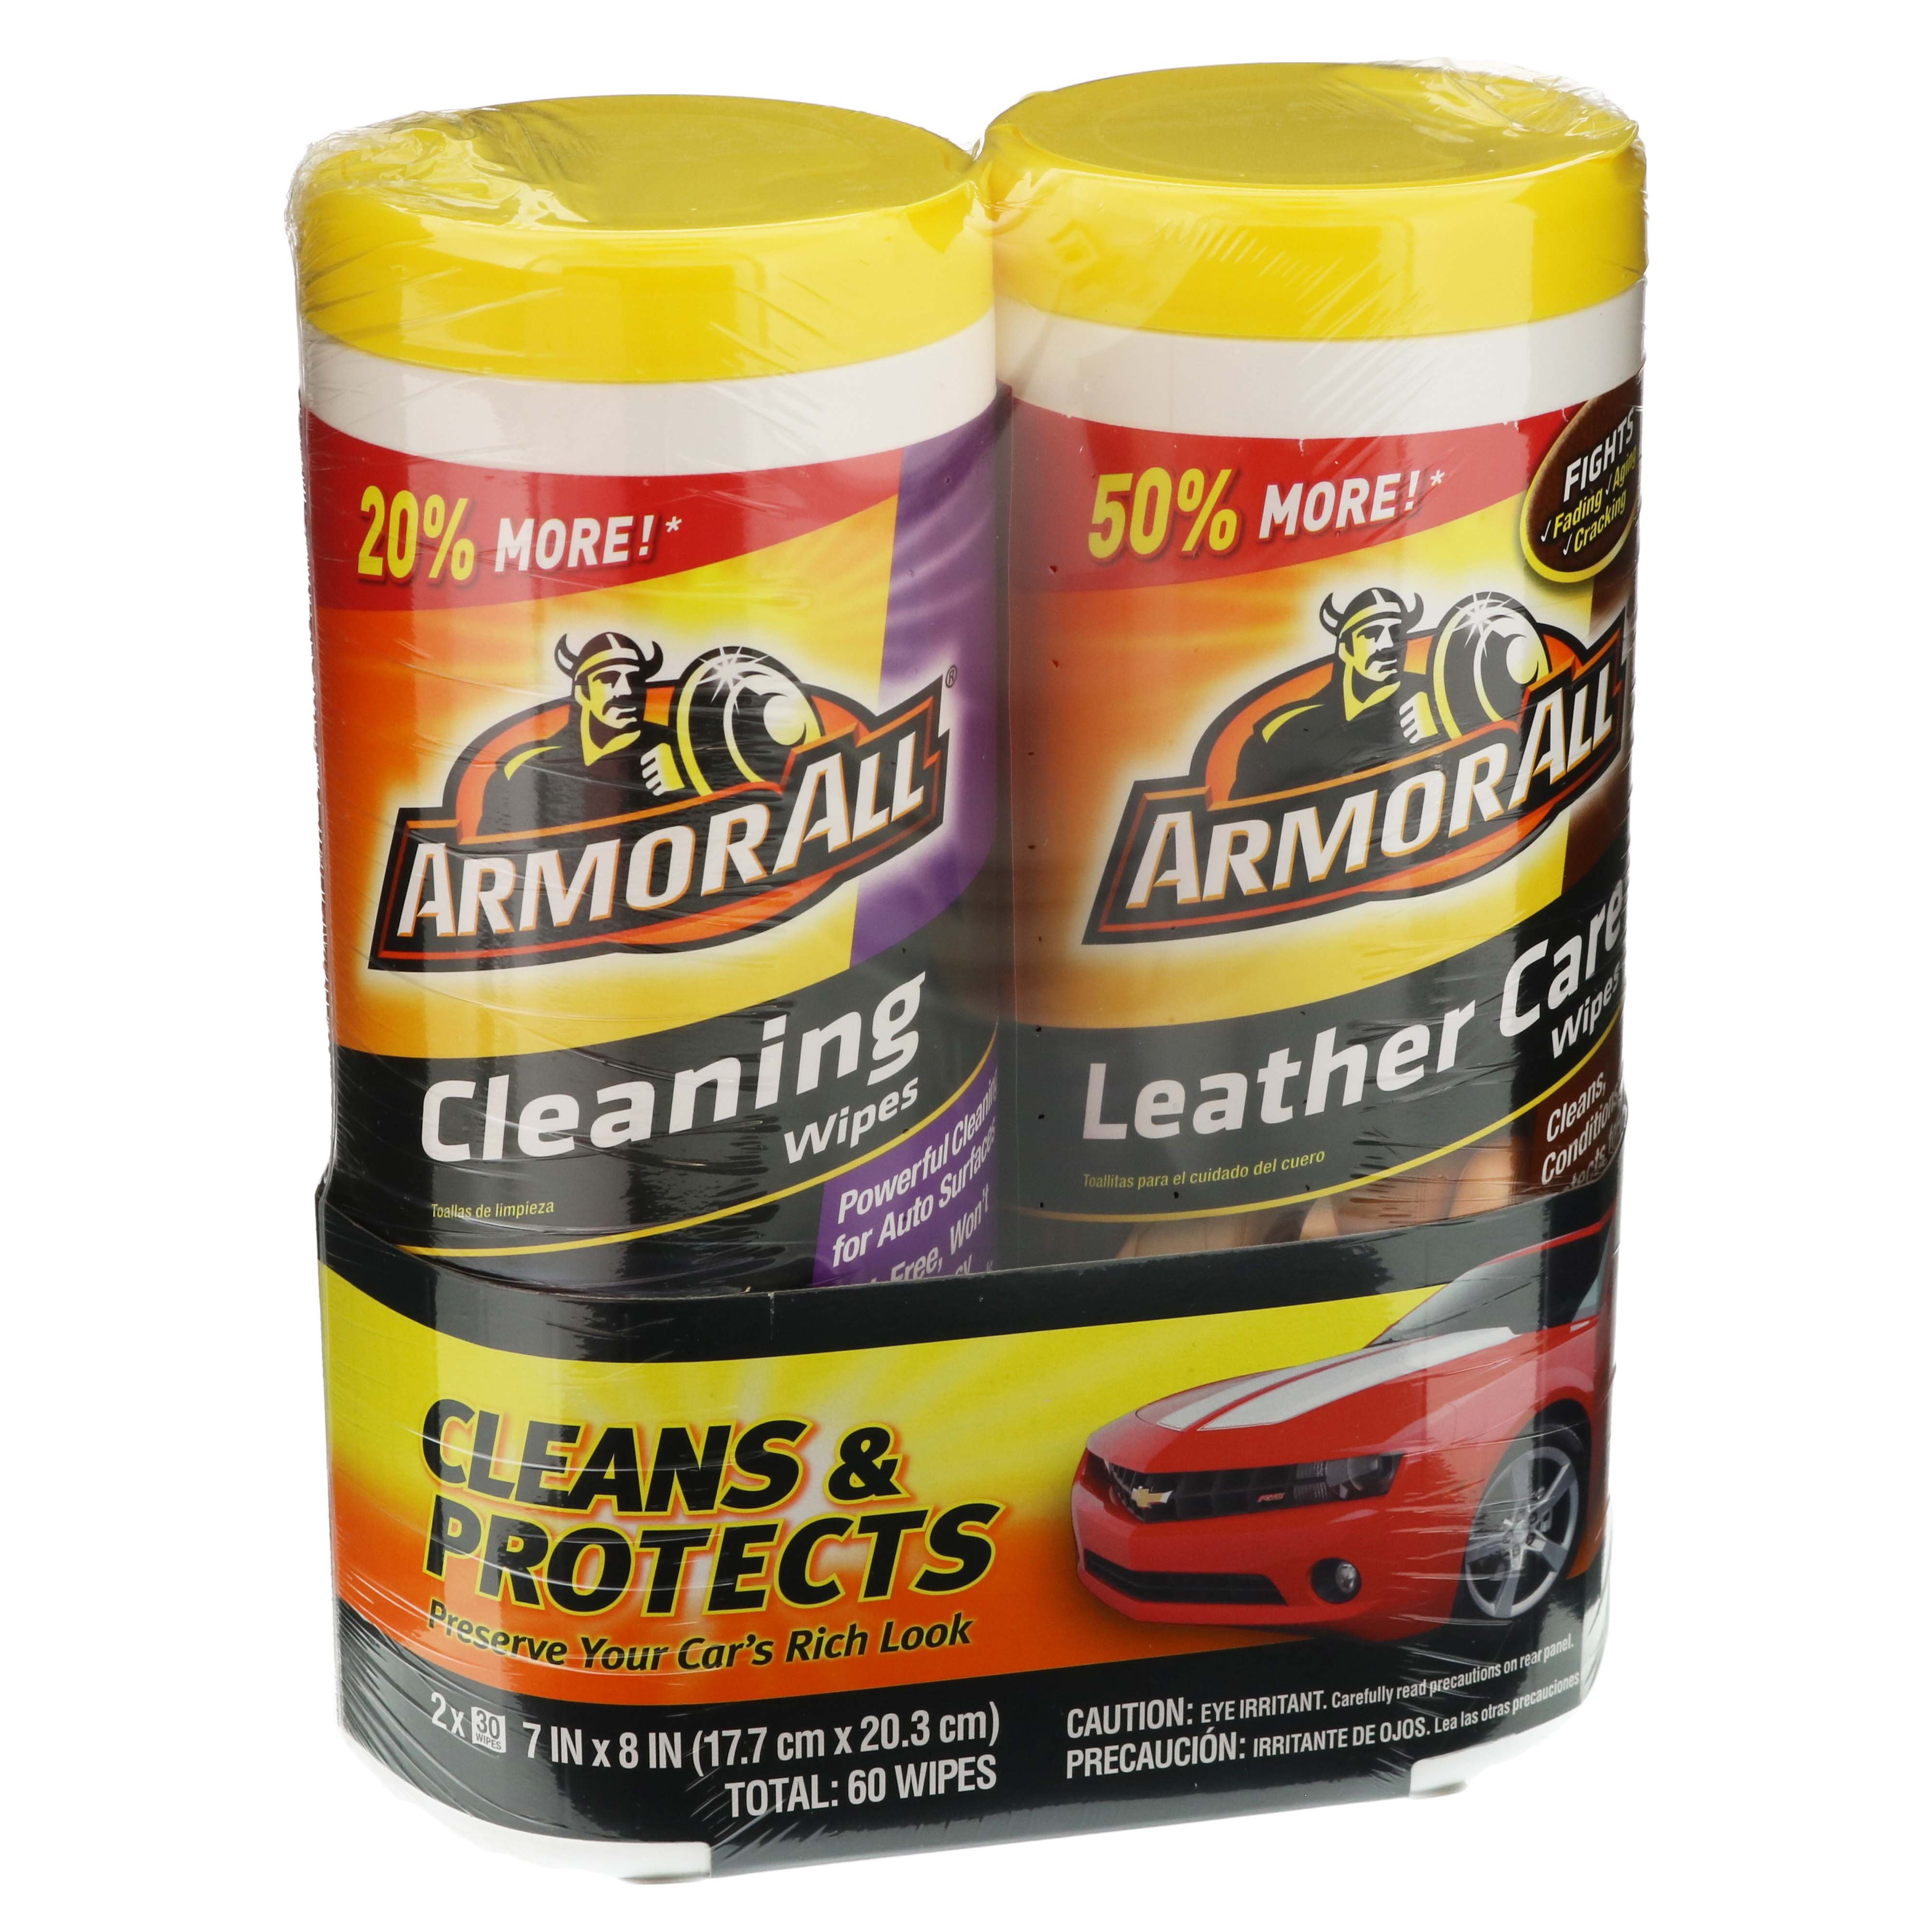 Armor All LEATHER CARE WIPES Clean Condition Protect